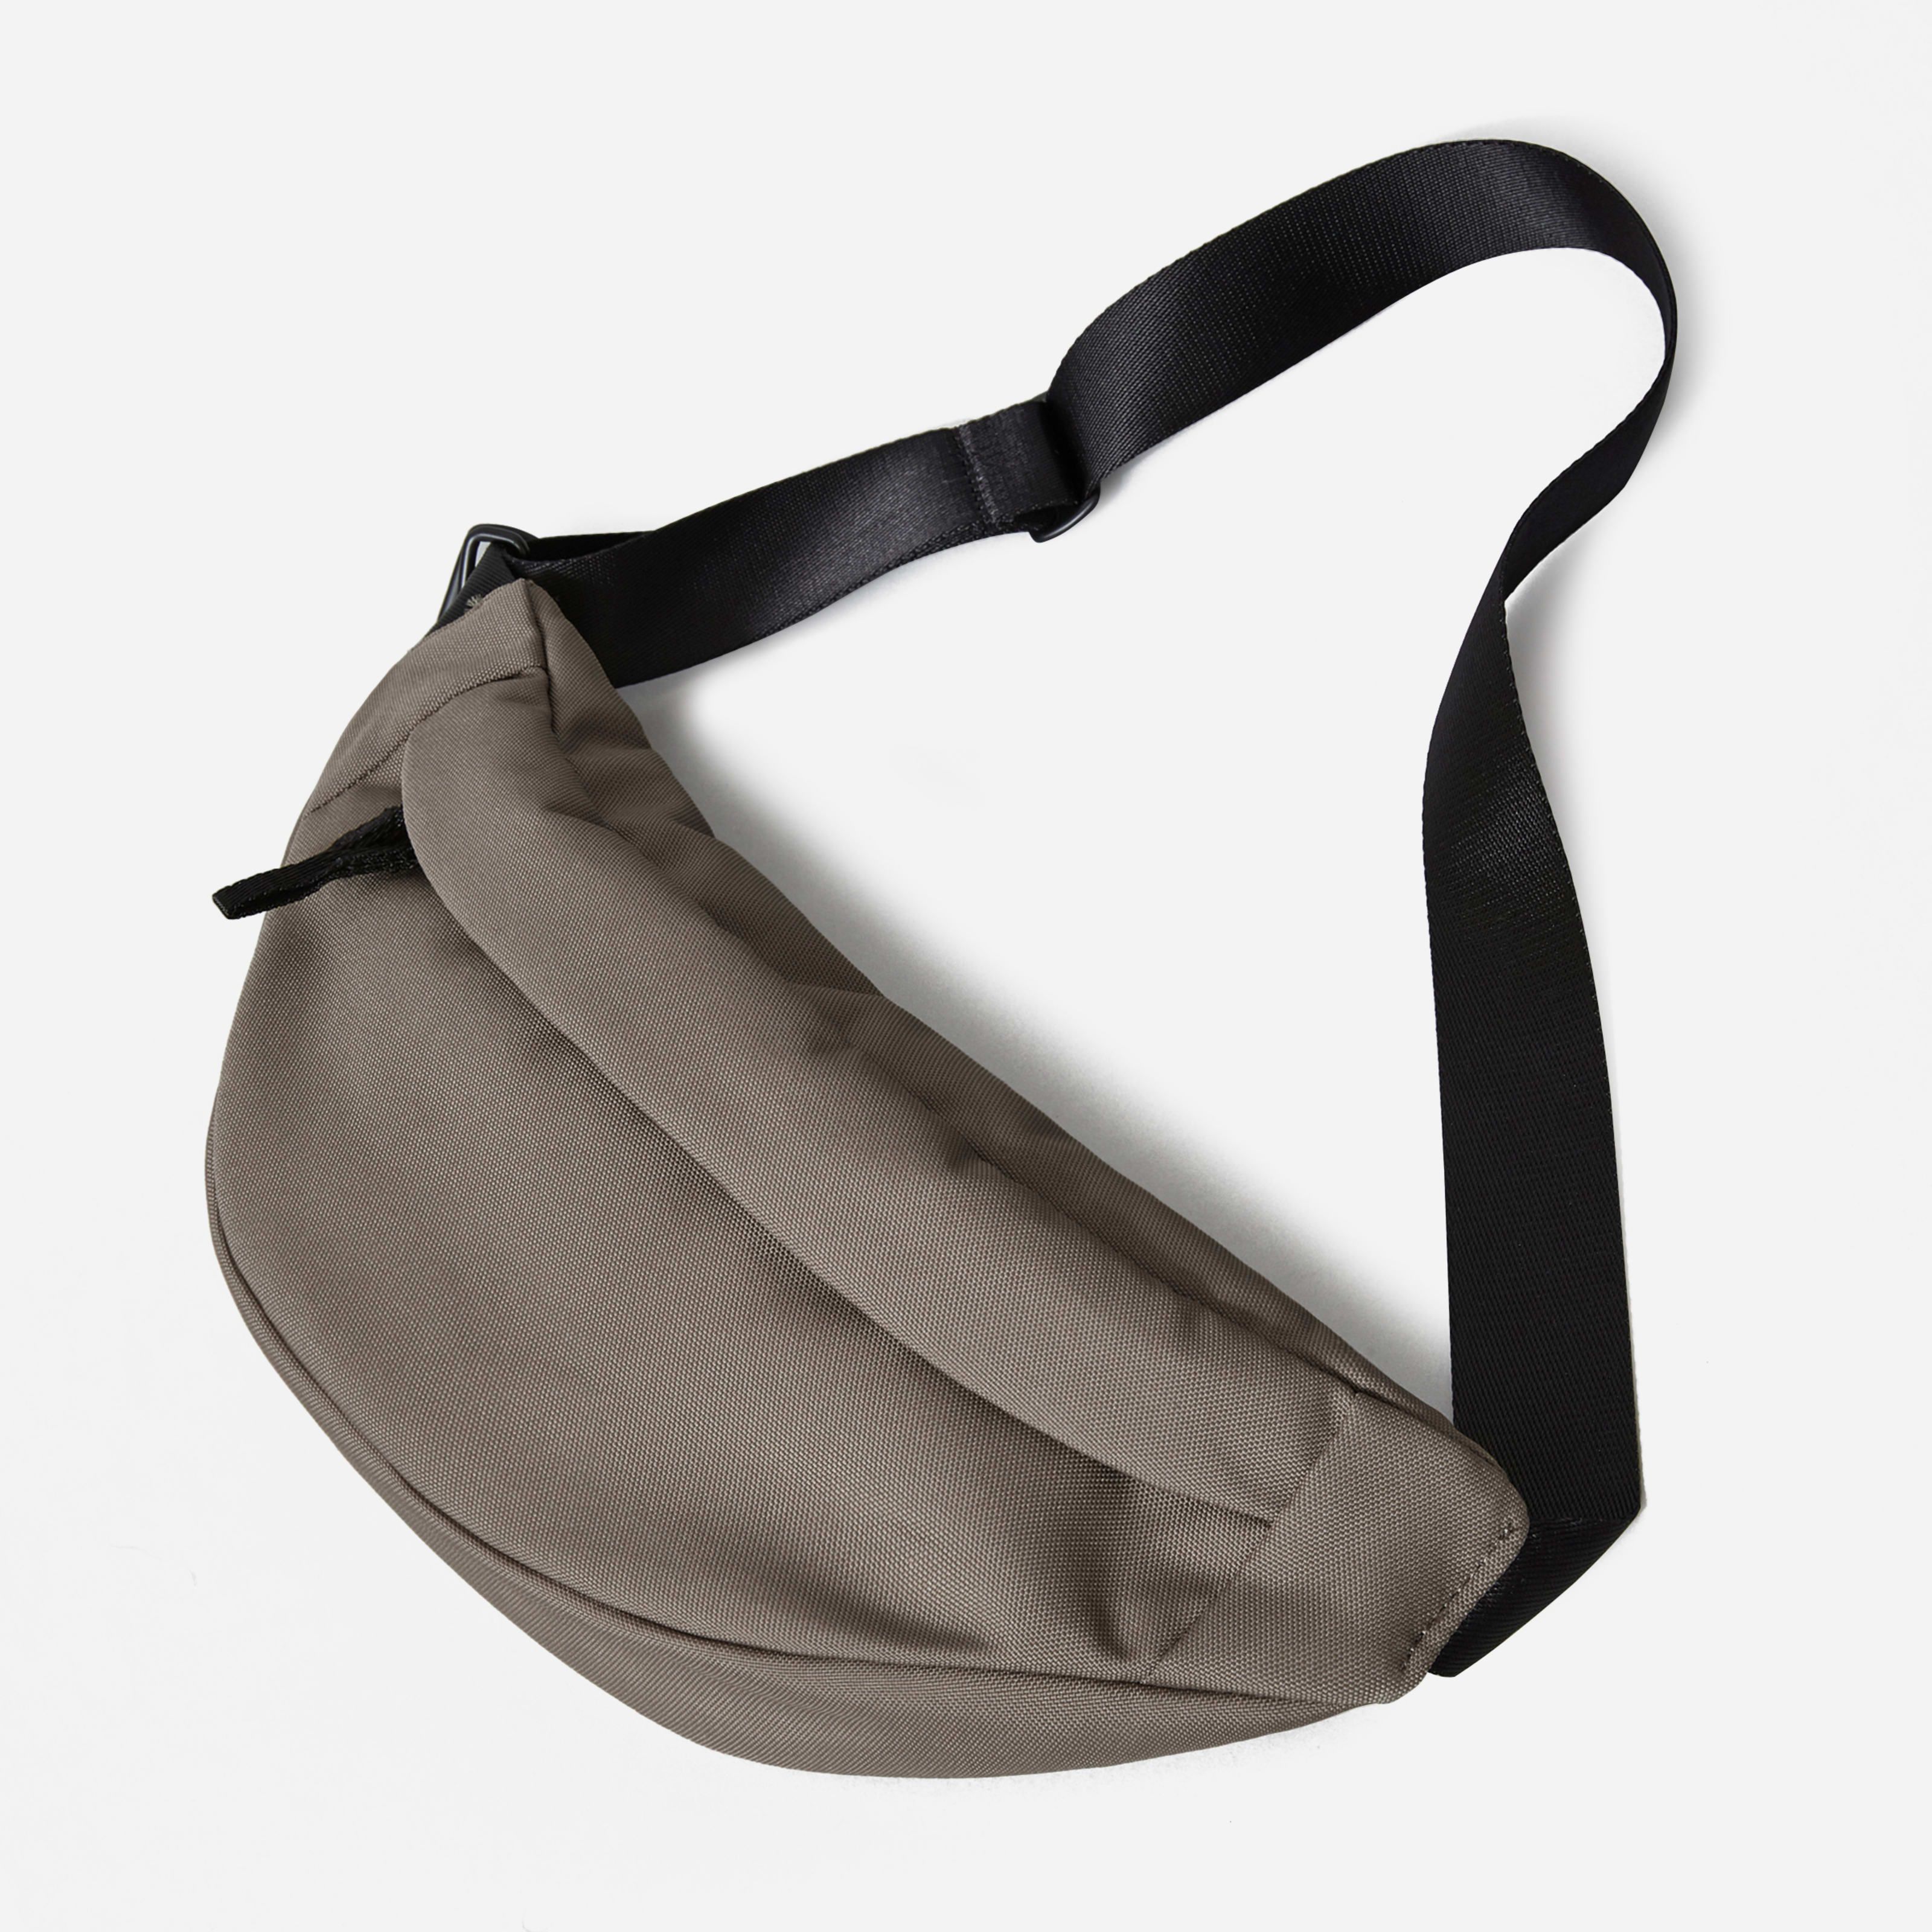 ReNew Transit Bag by Everlane in Warm Charcoal | Everlane